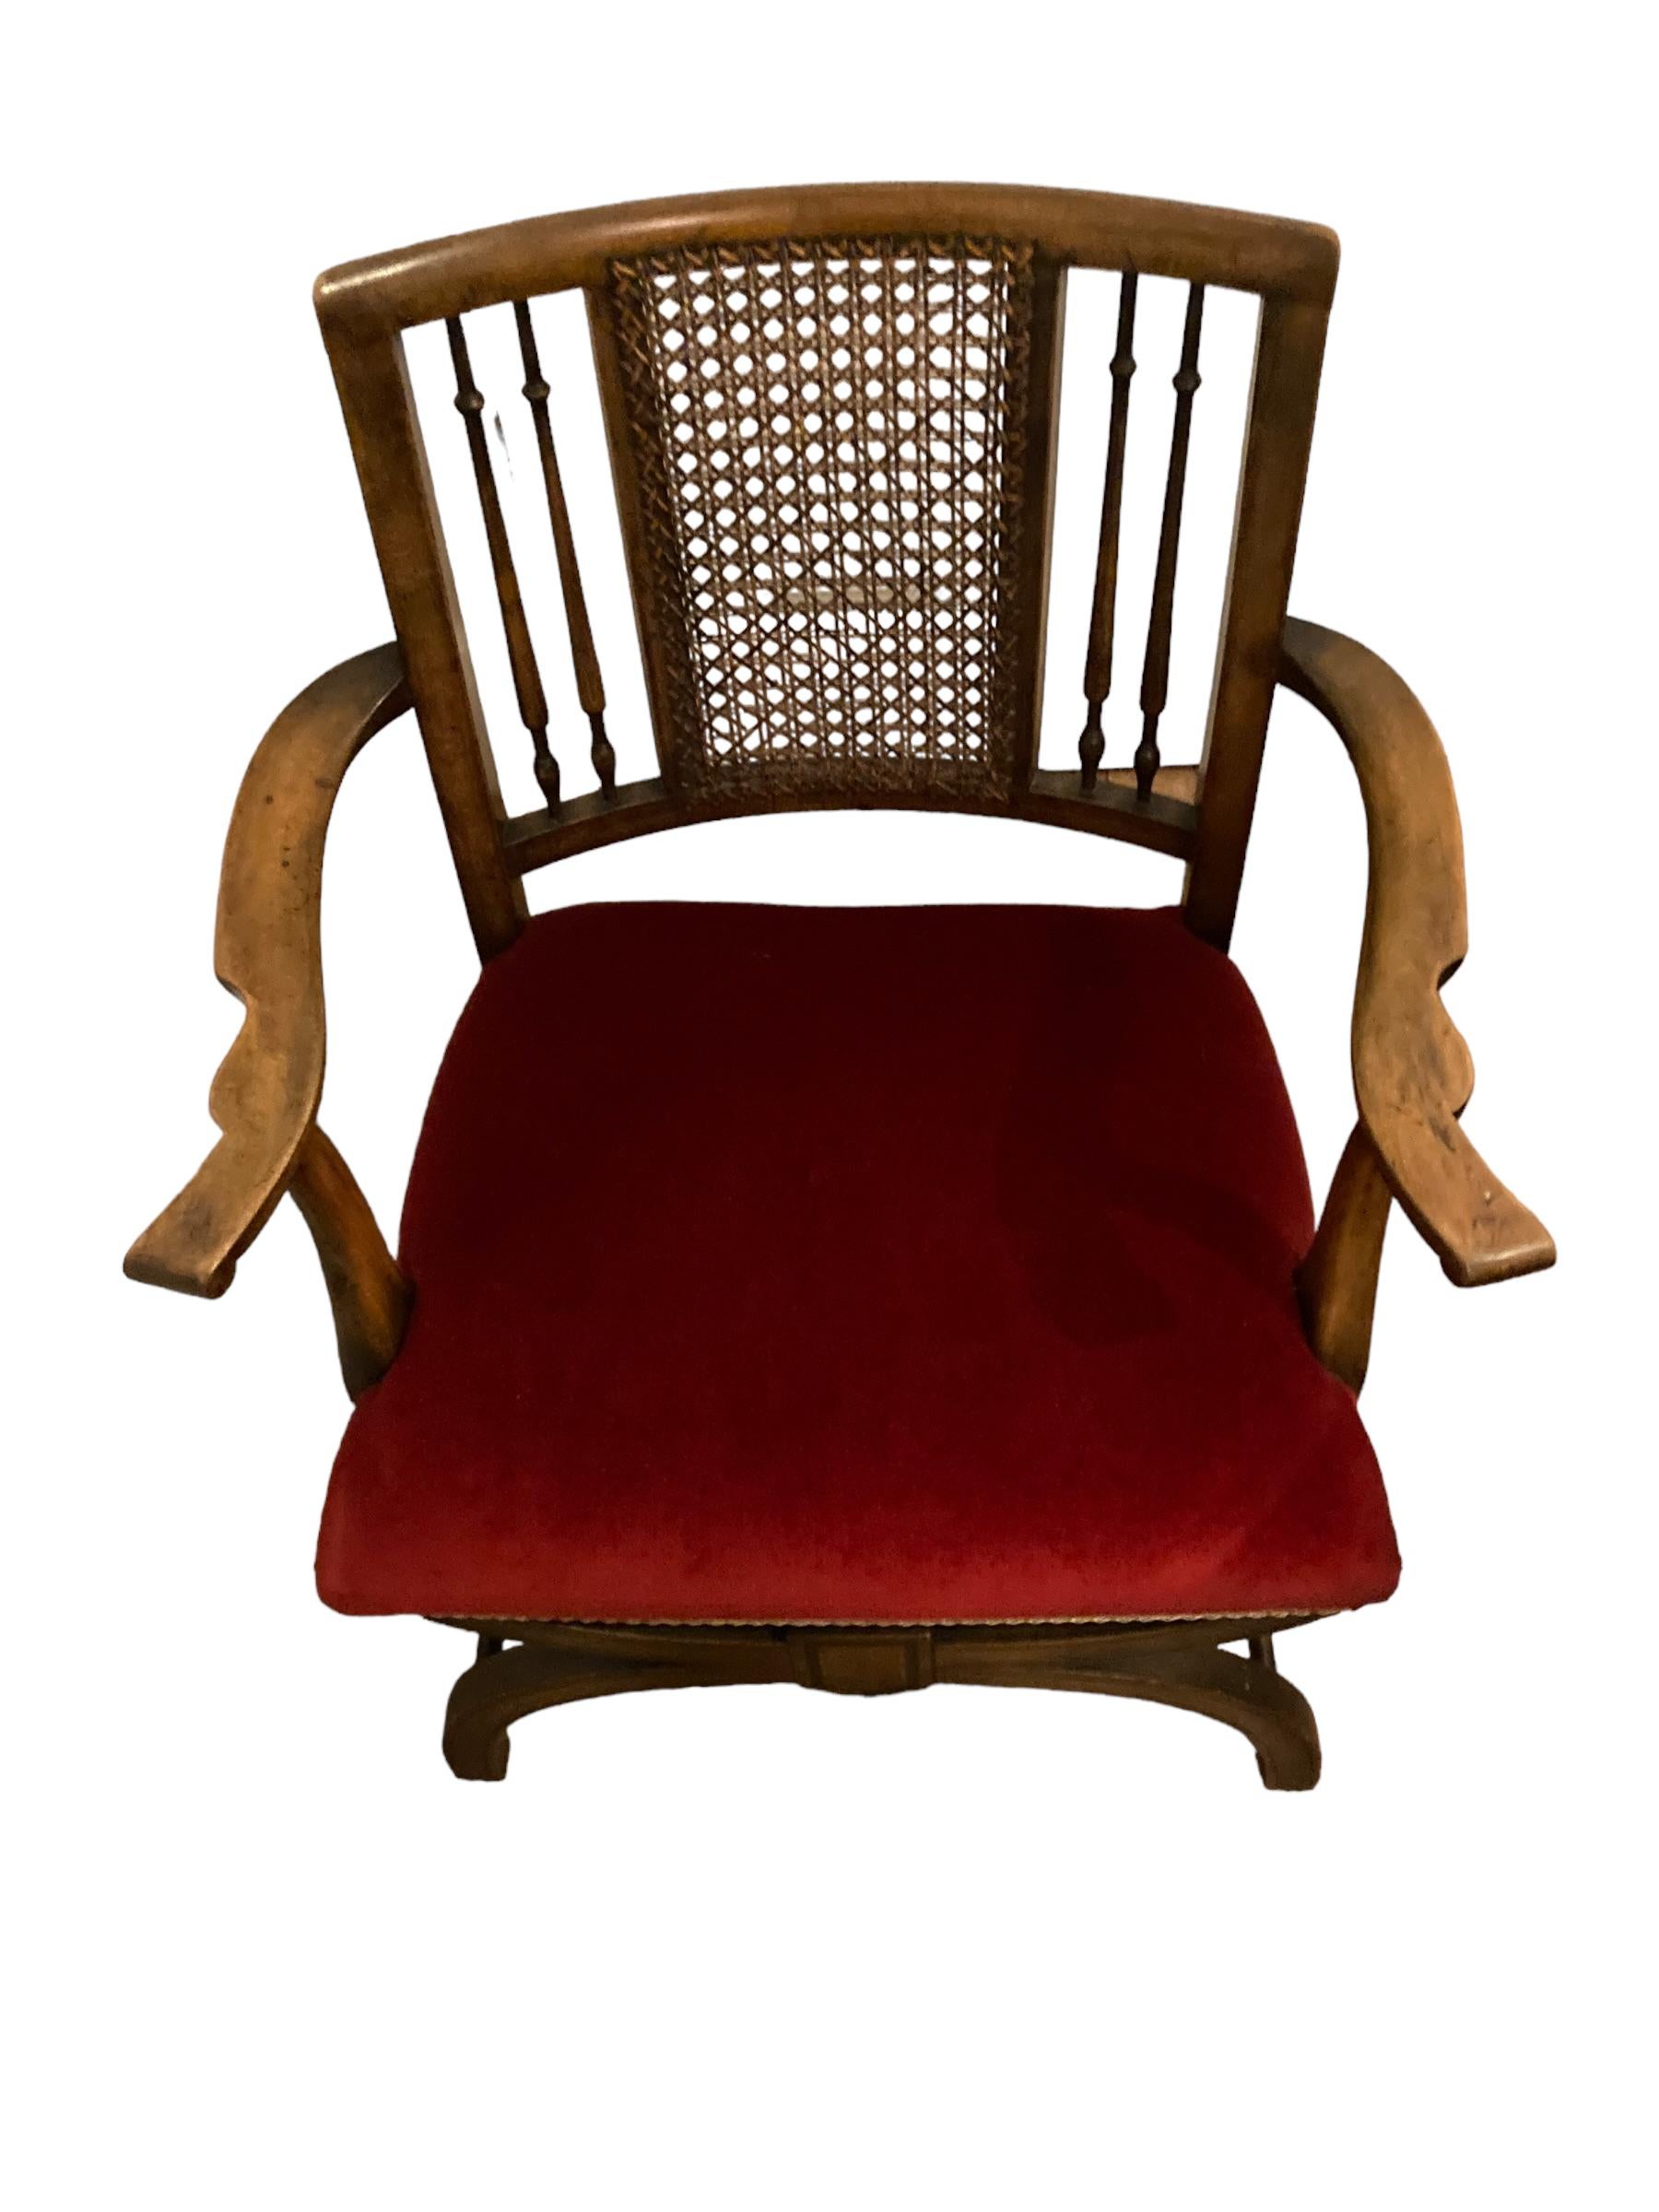 A rare Antique Beech Wood X Framed Cane back Arm chair For Sale 4